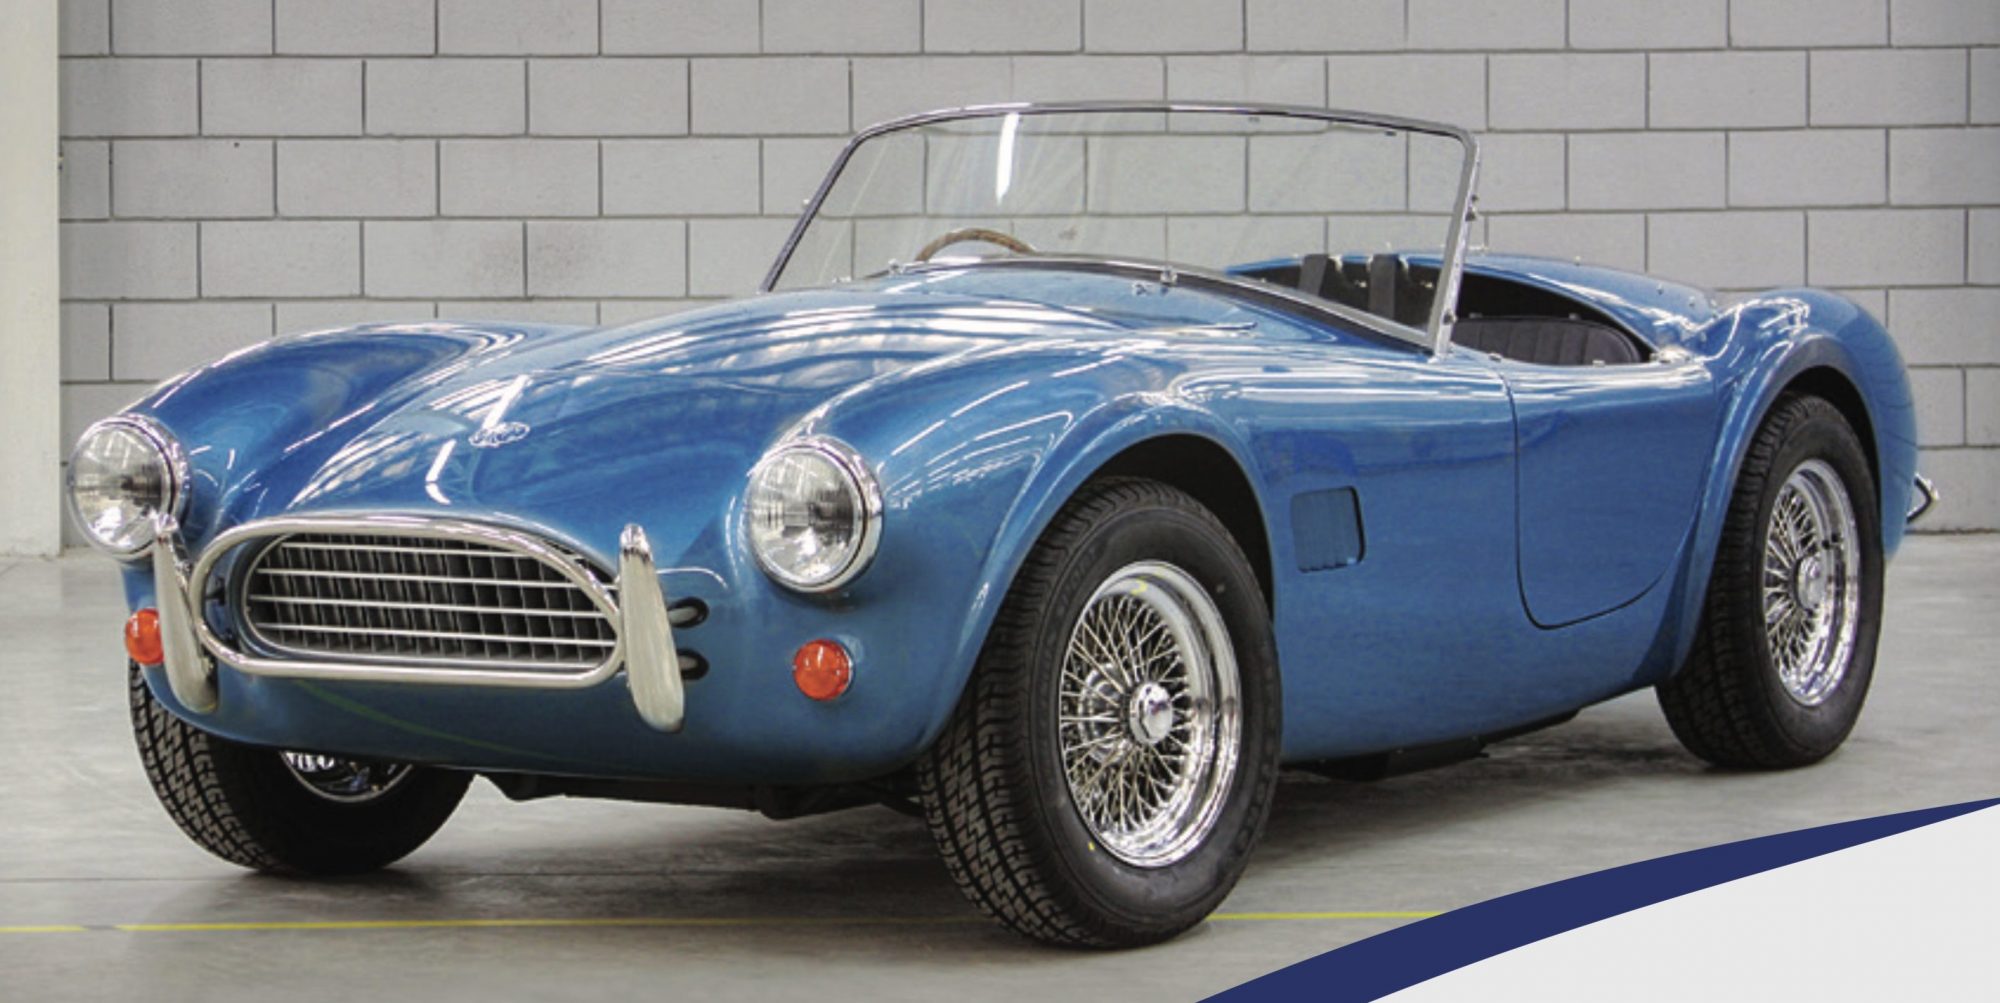 Ac Cars Is Building An Electric Cobra For 138 000 Electrek